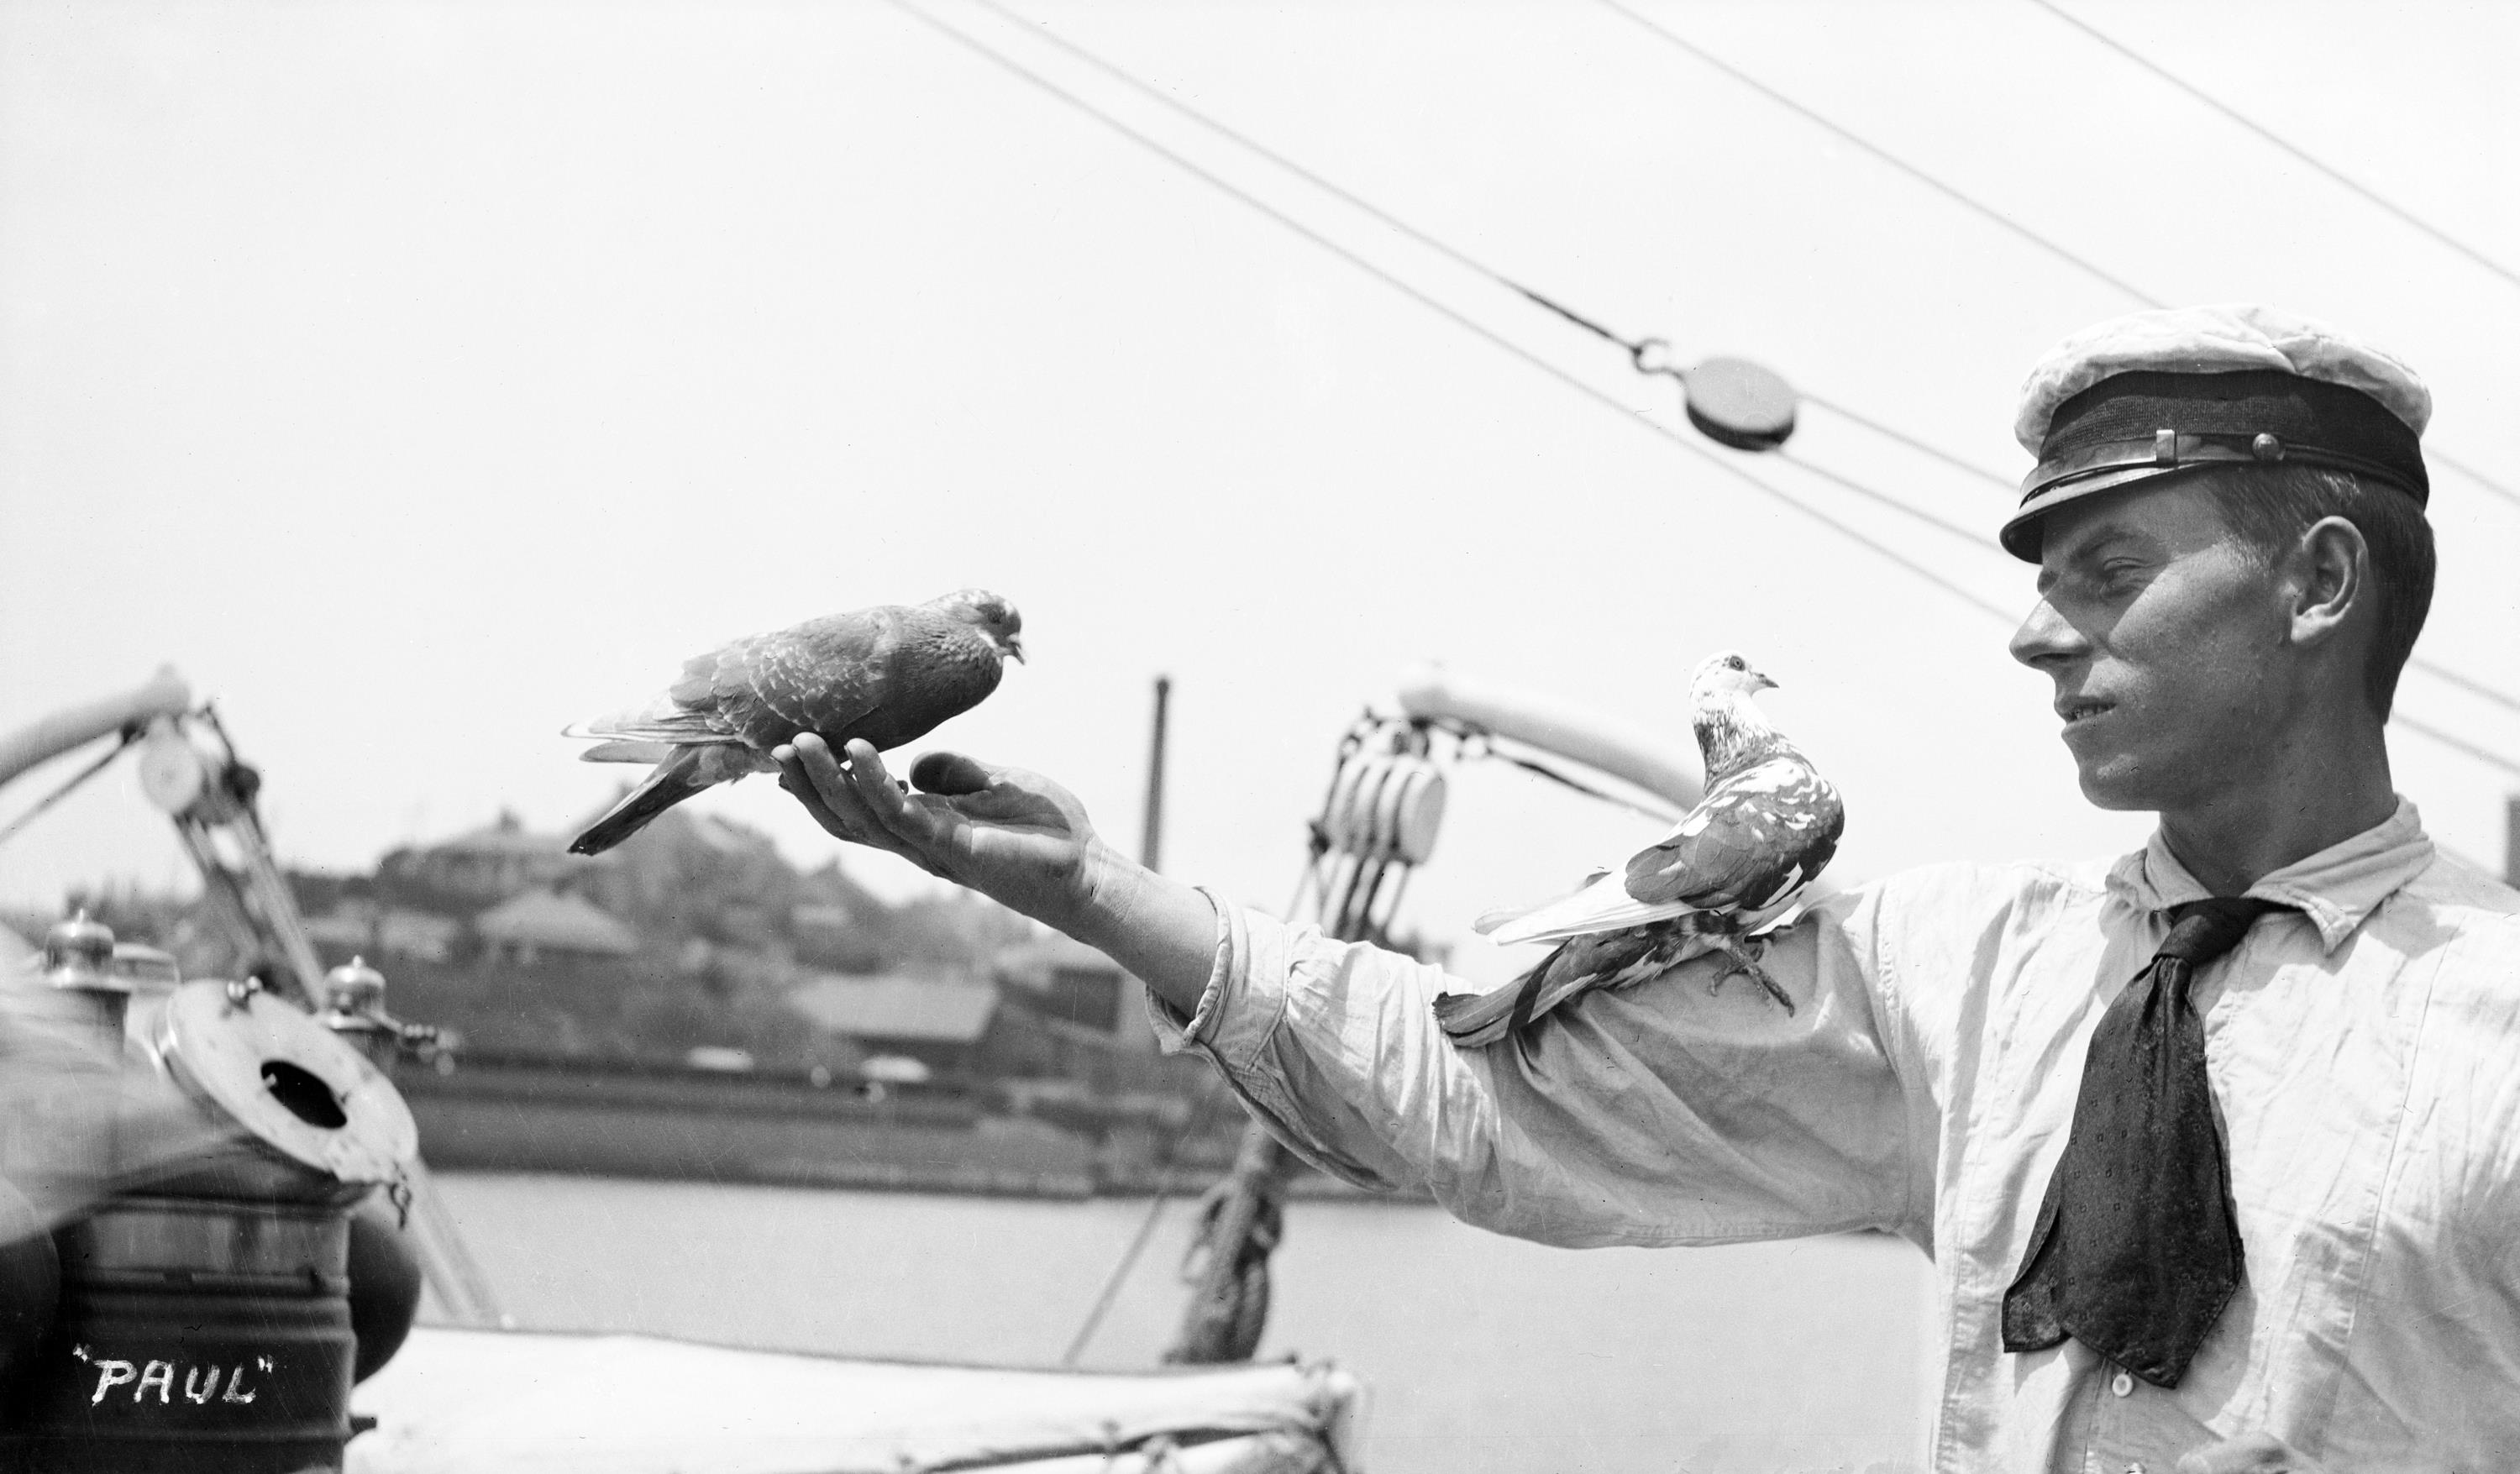 A merchant mariner officer with two pigeons used for communications sitting on his arm